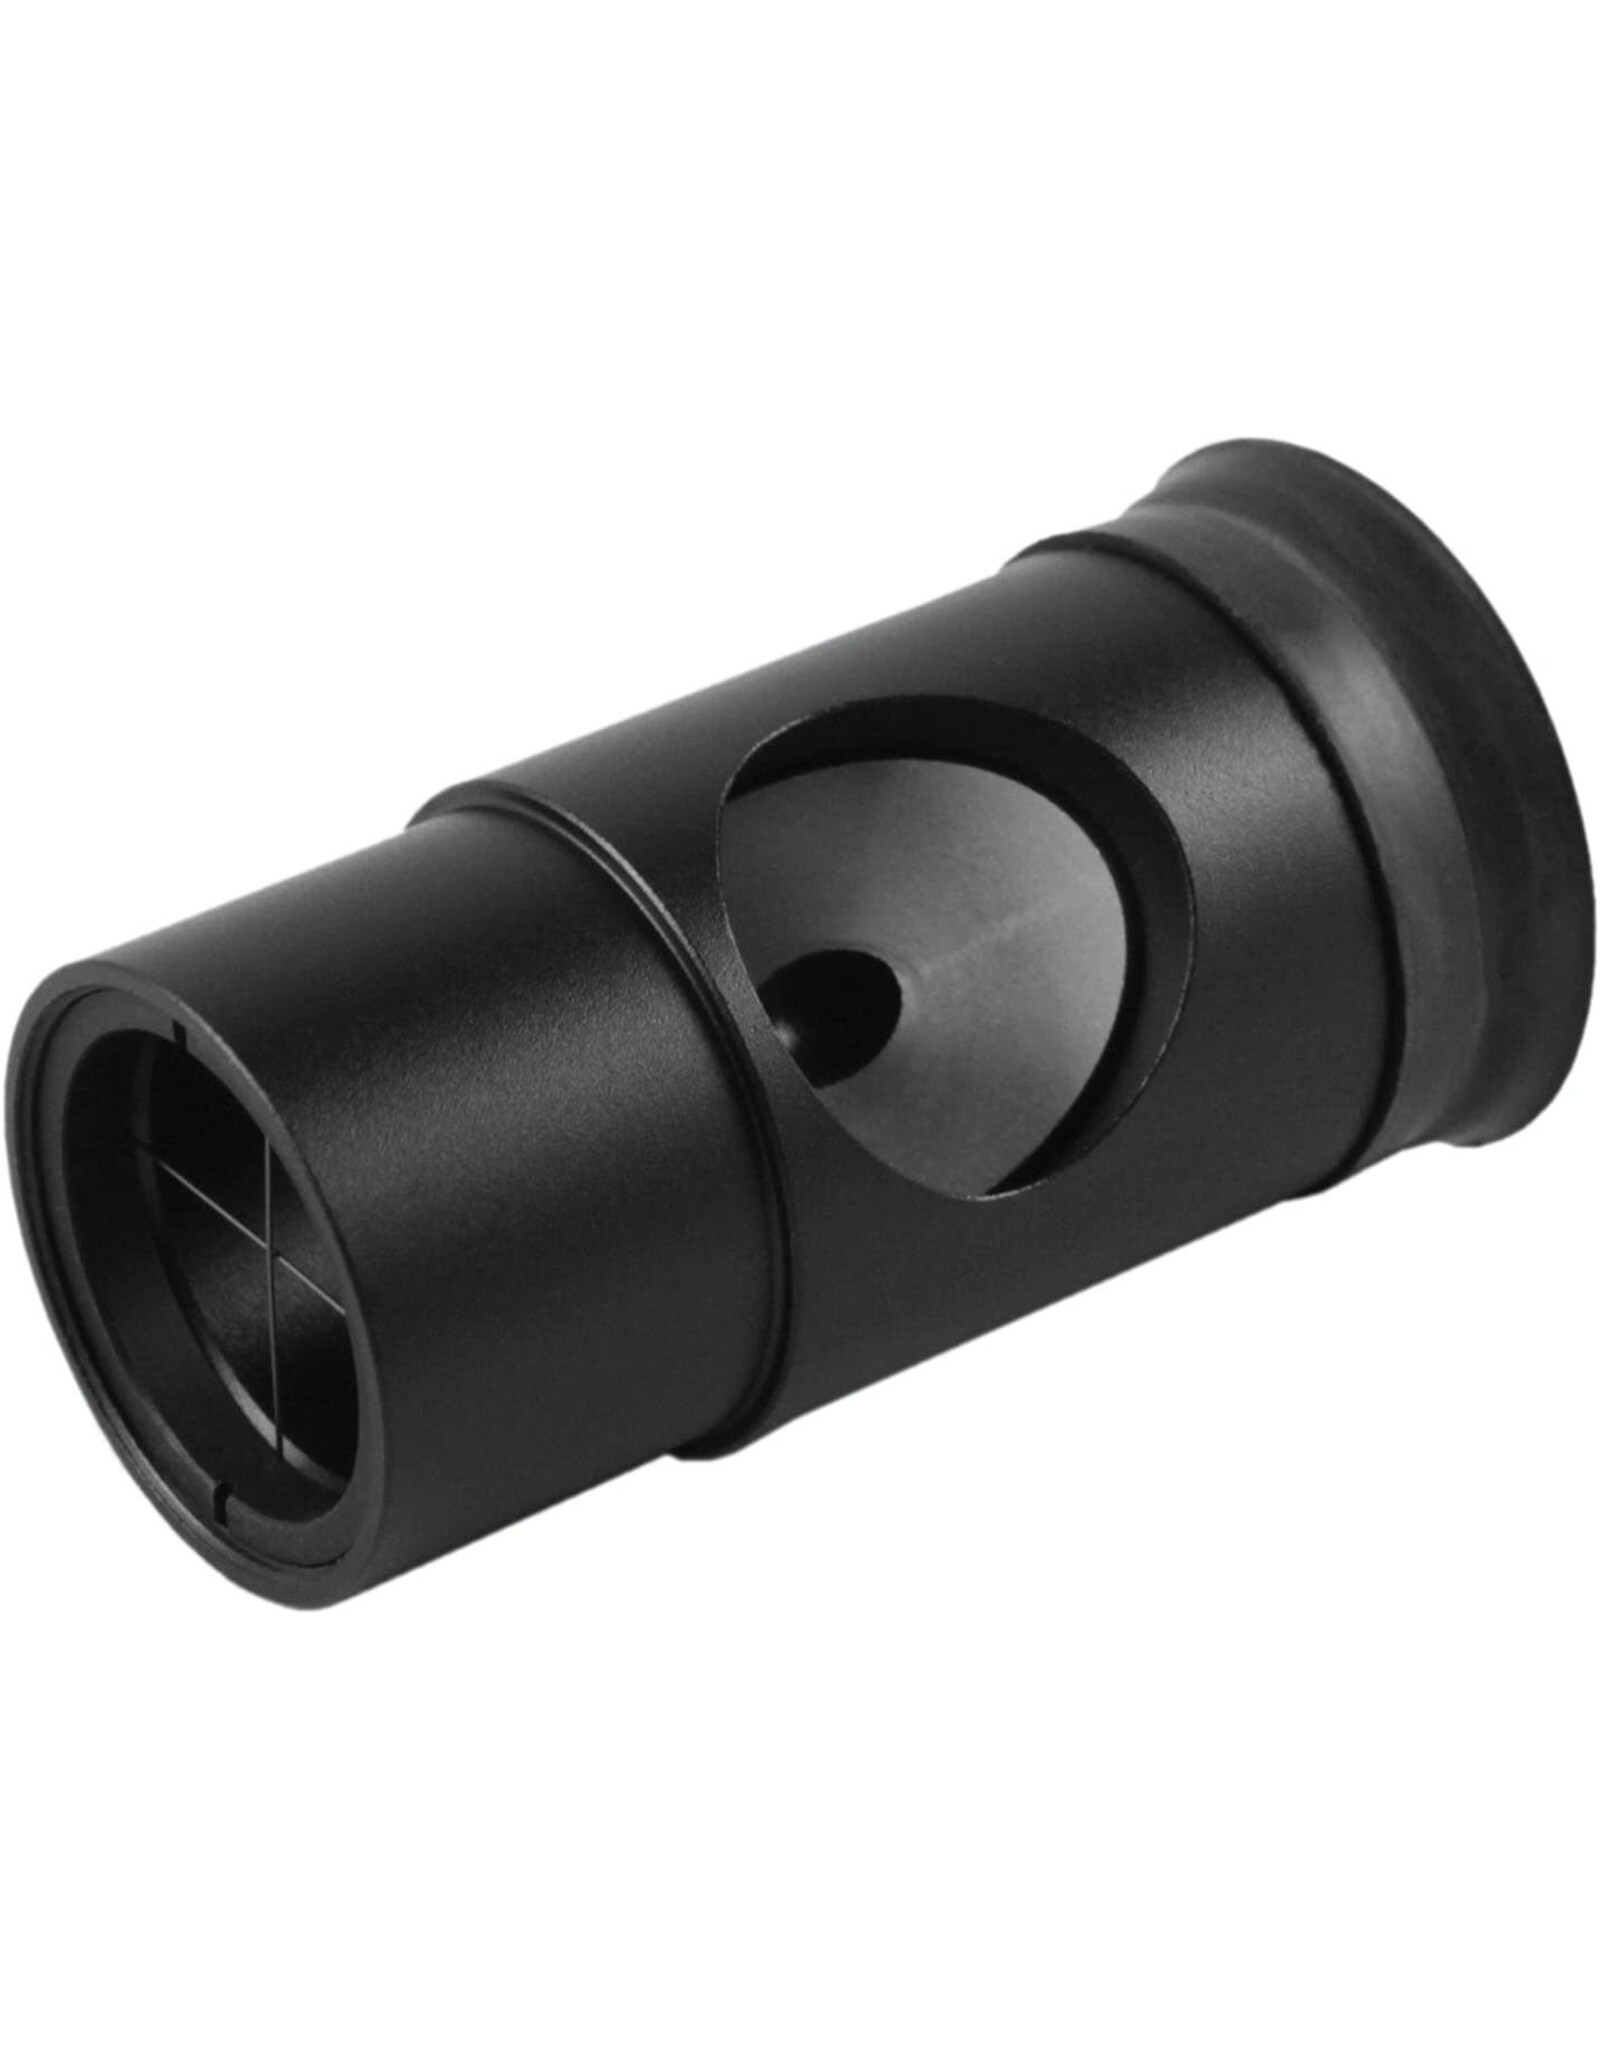 Arcturus Arcturus 1.25 Inch Metal Collimating Cheshire Eyepiece Without Laser for Newtonian Reflector Telescope - Short Version